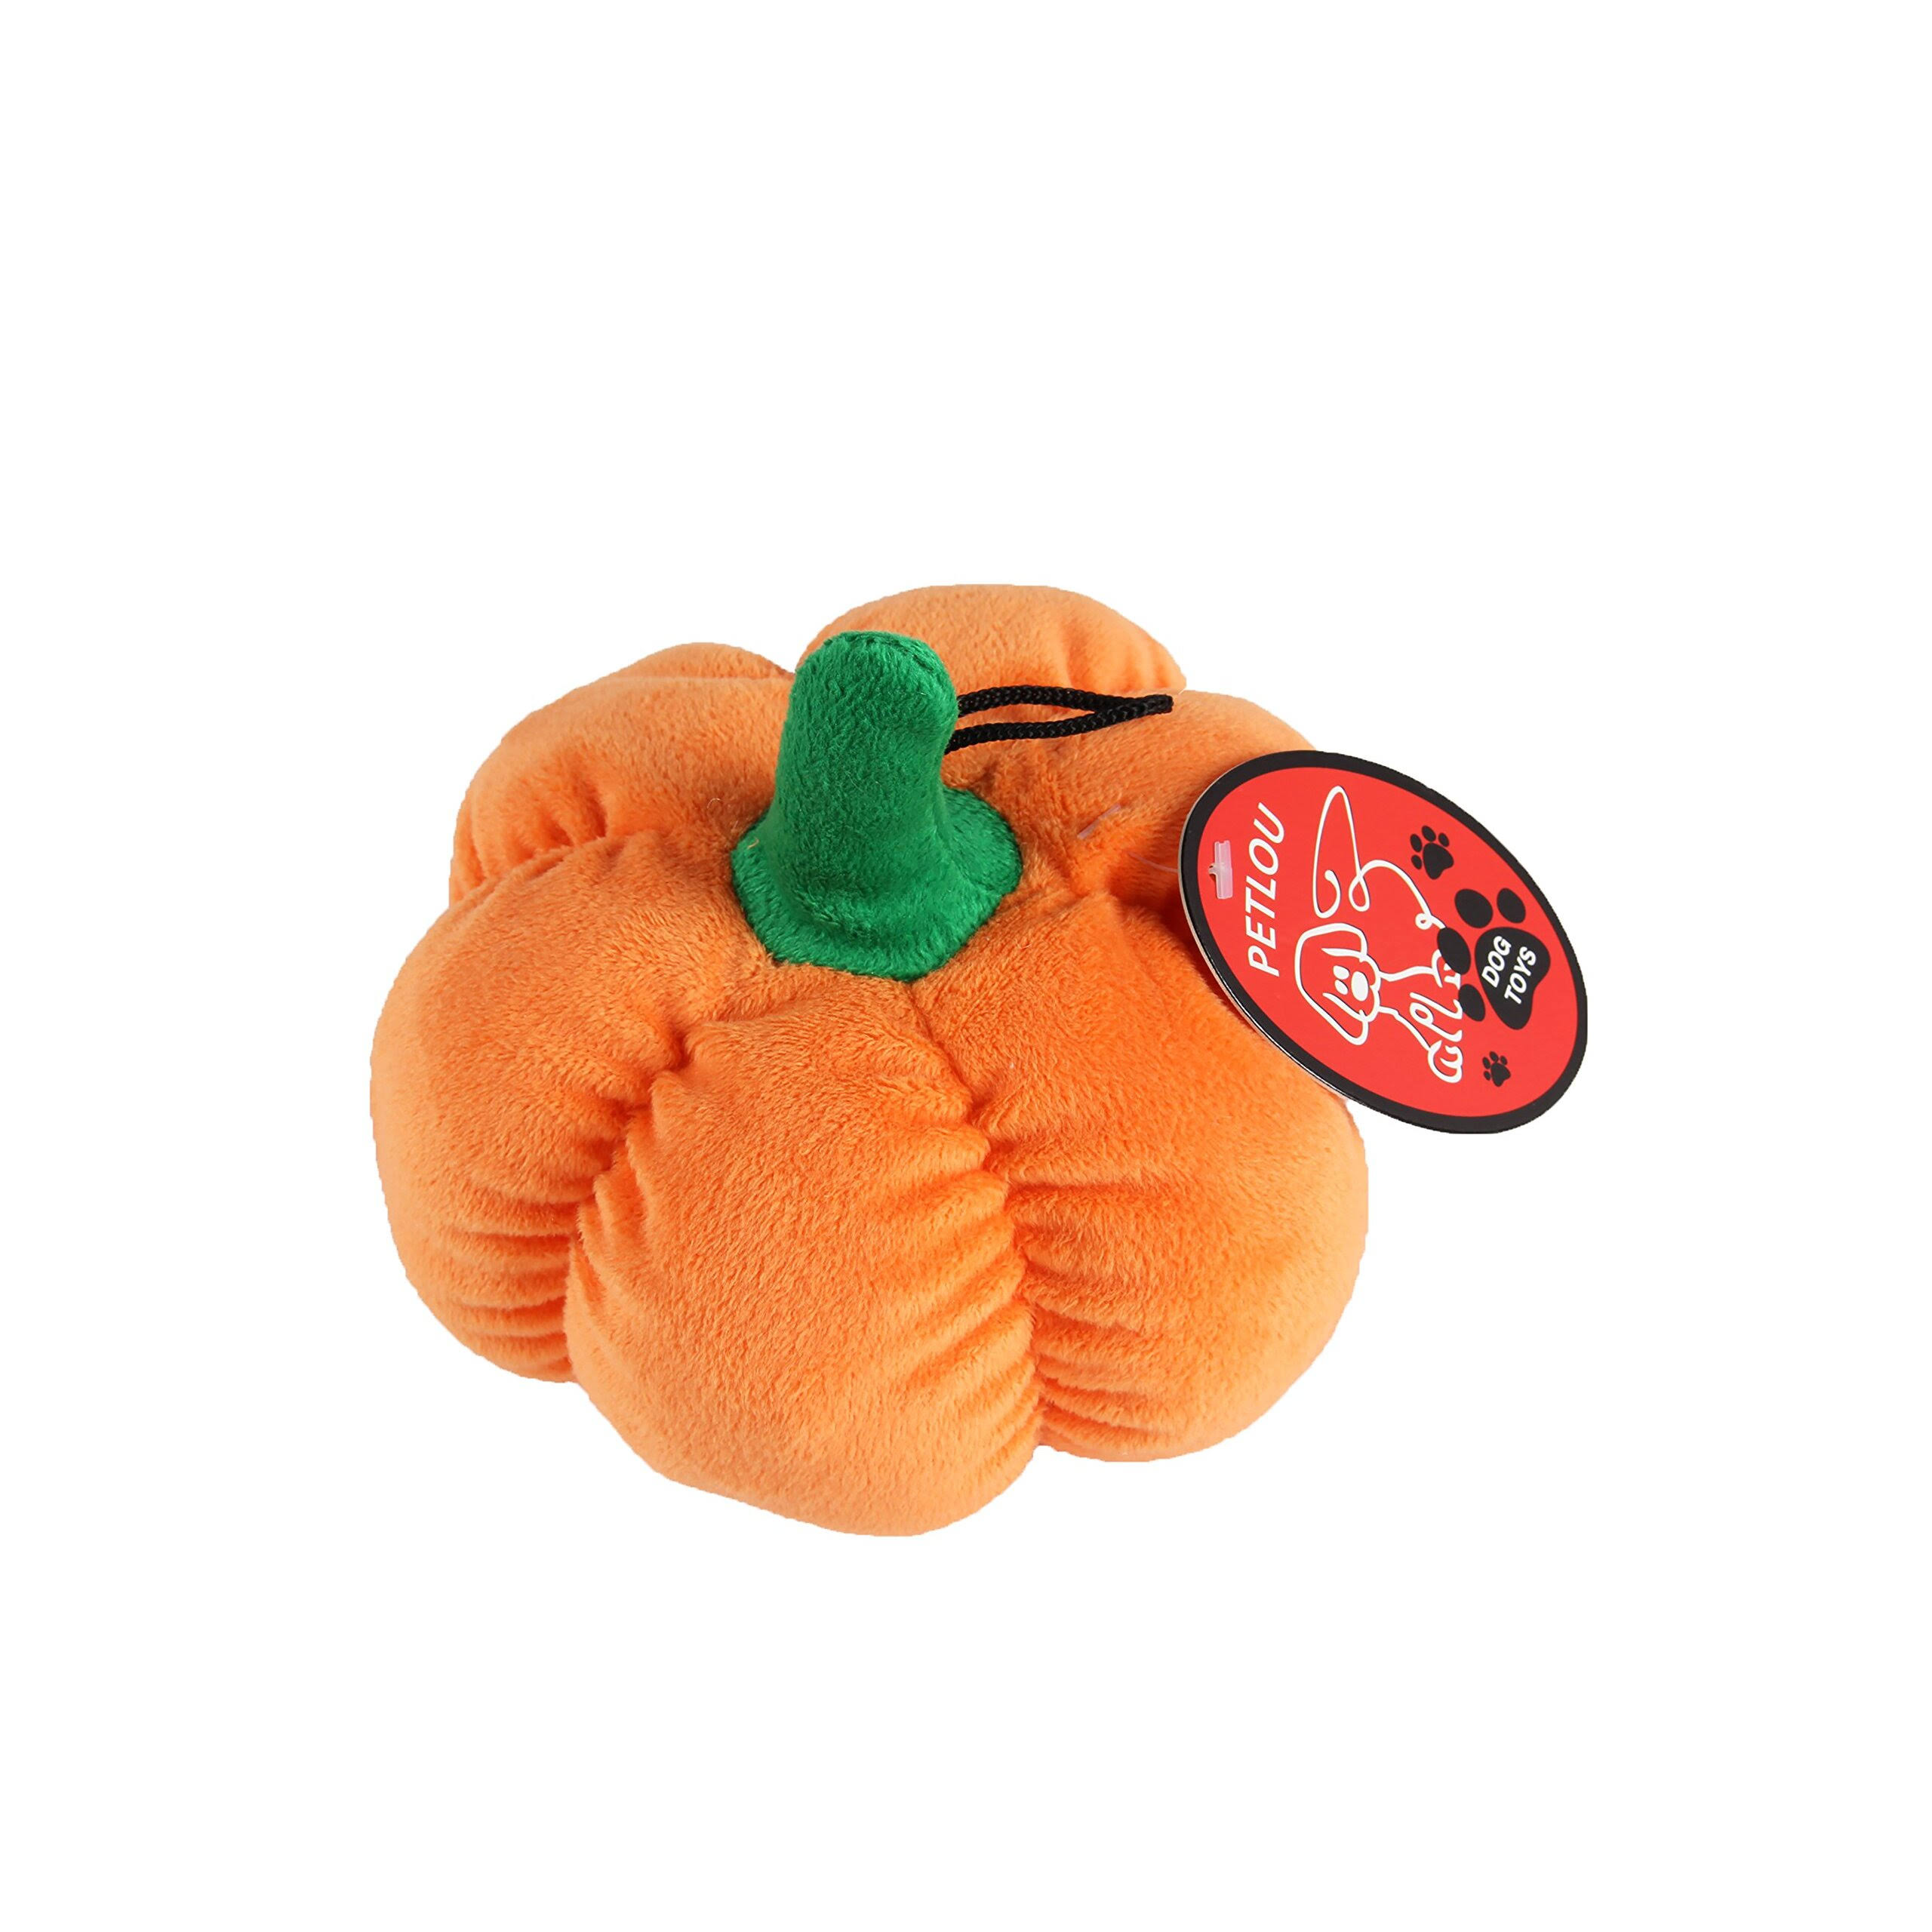 Petlou Durable Plush Dog and Cat Toys with Multi-Squeaks and Crinkle Paper. (Orange, 6-Inch Pumpkin)